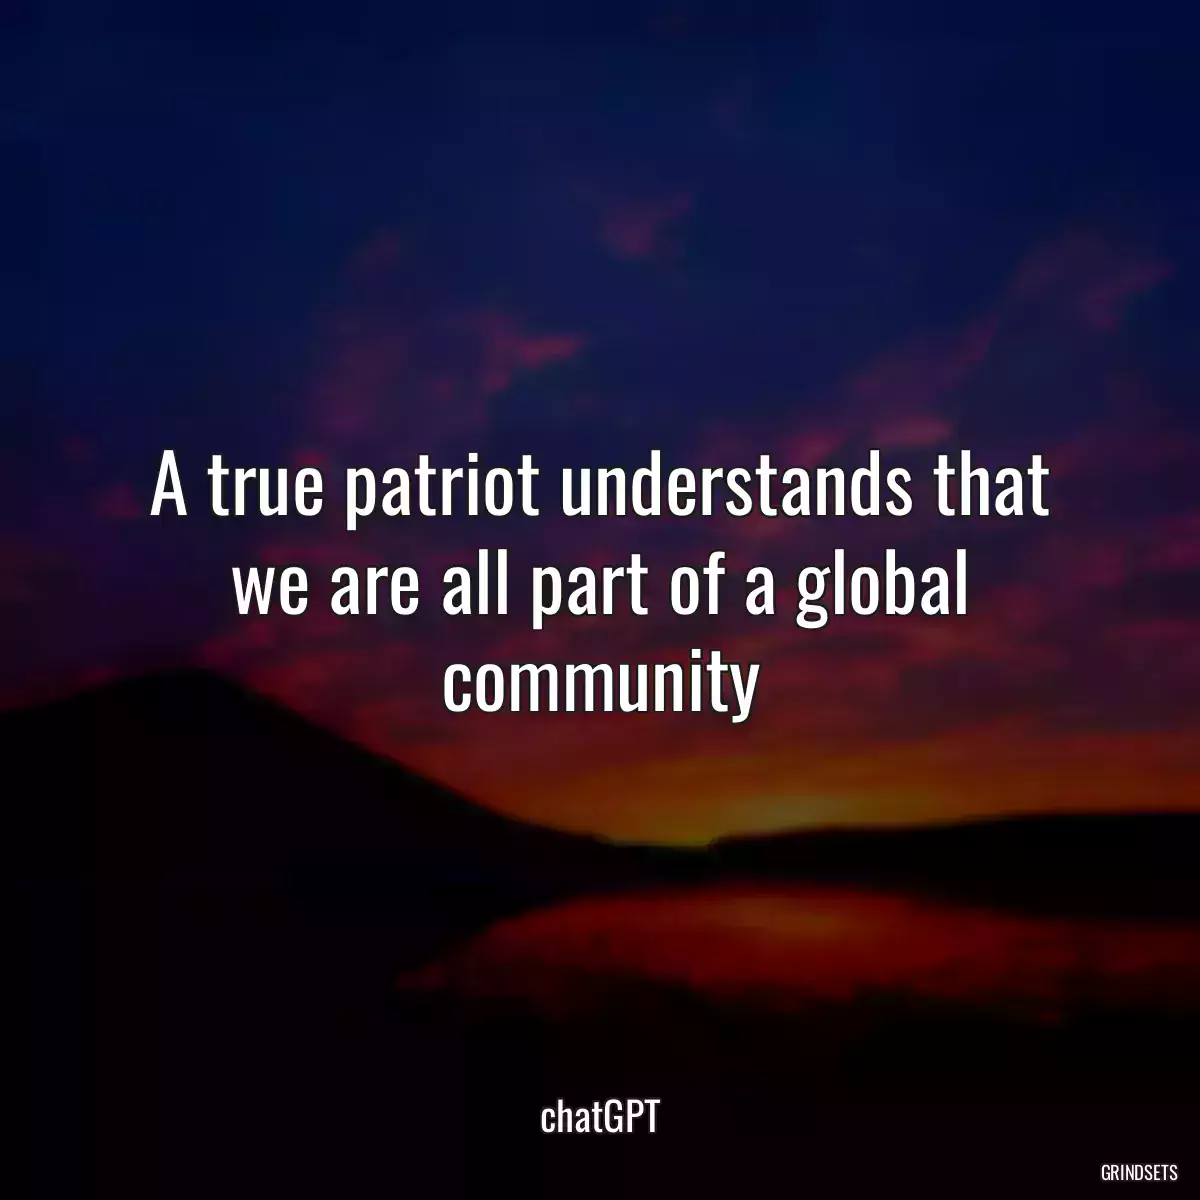 A true patriot understands that we are all part of a global community